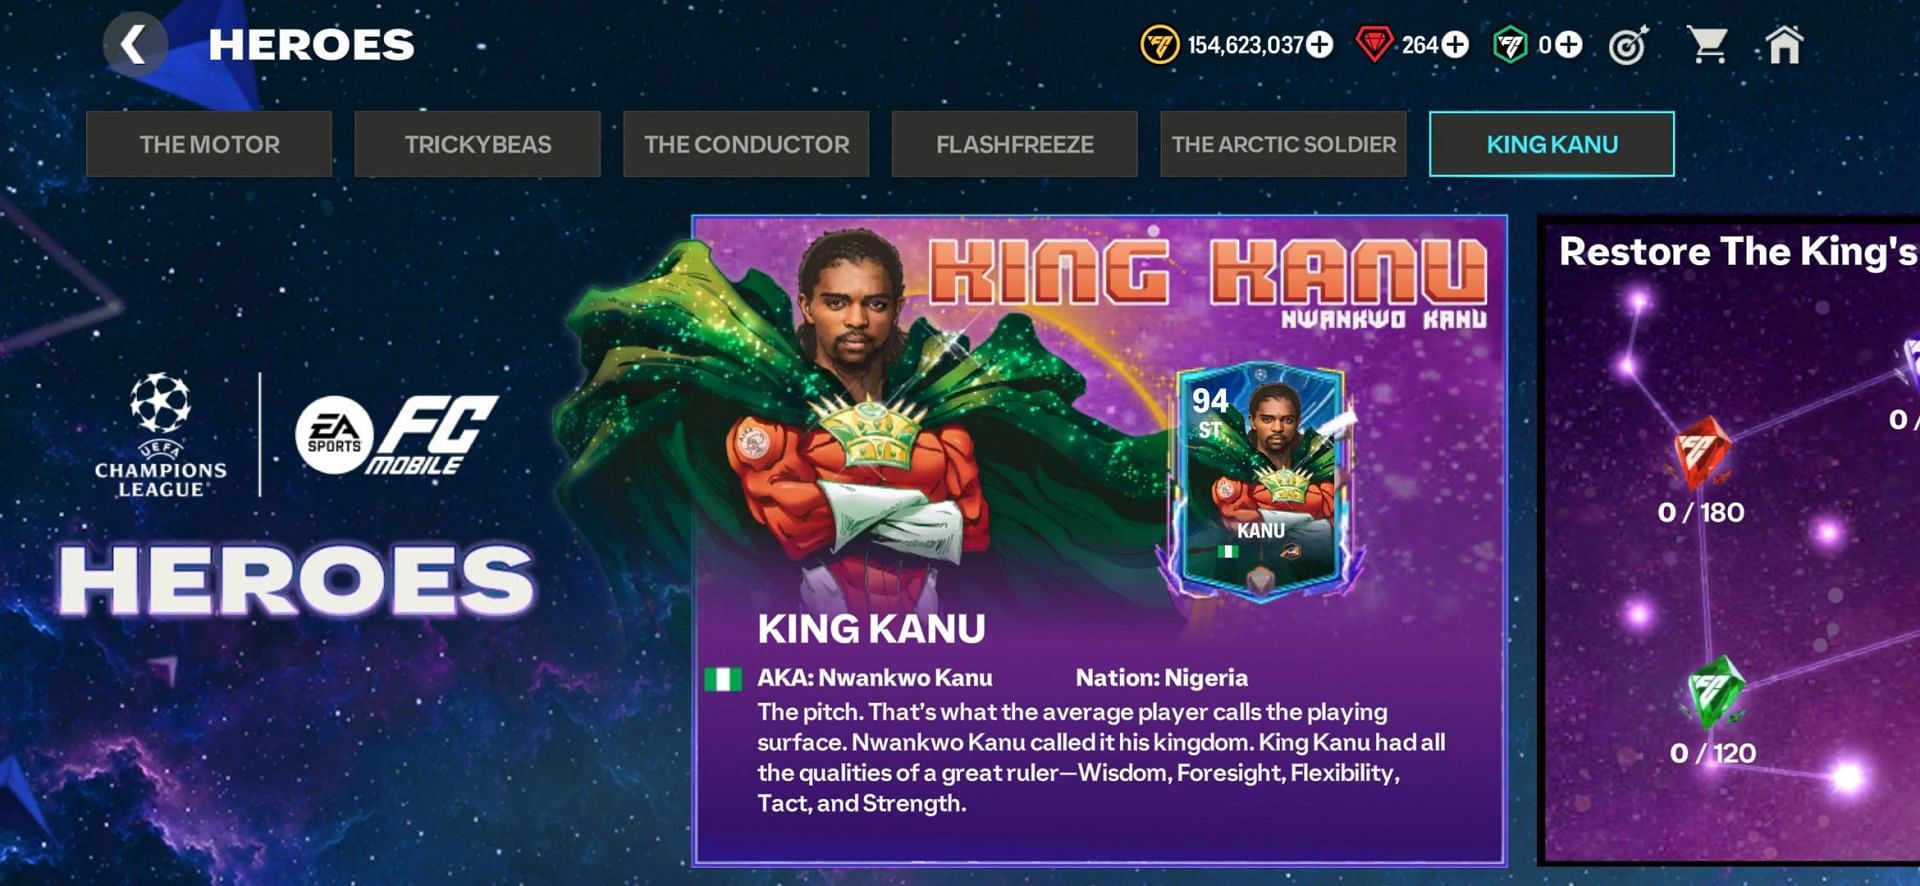 Heroes King Kanu is a newly structured event chapter in the FC Mobile Heroes event (Image via EA Sports)